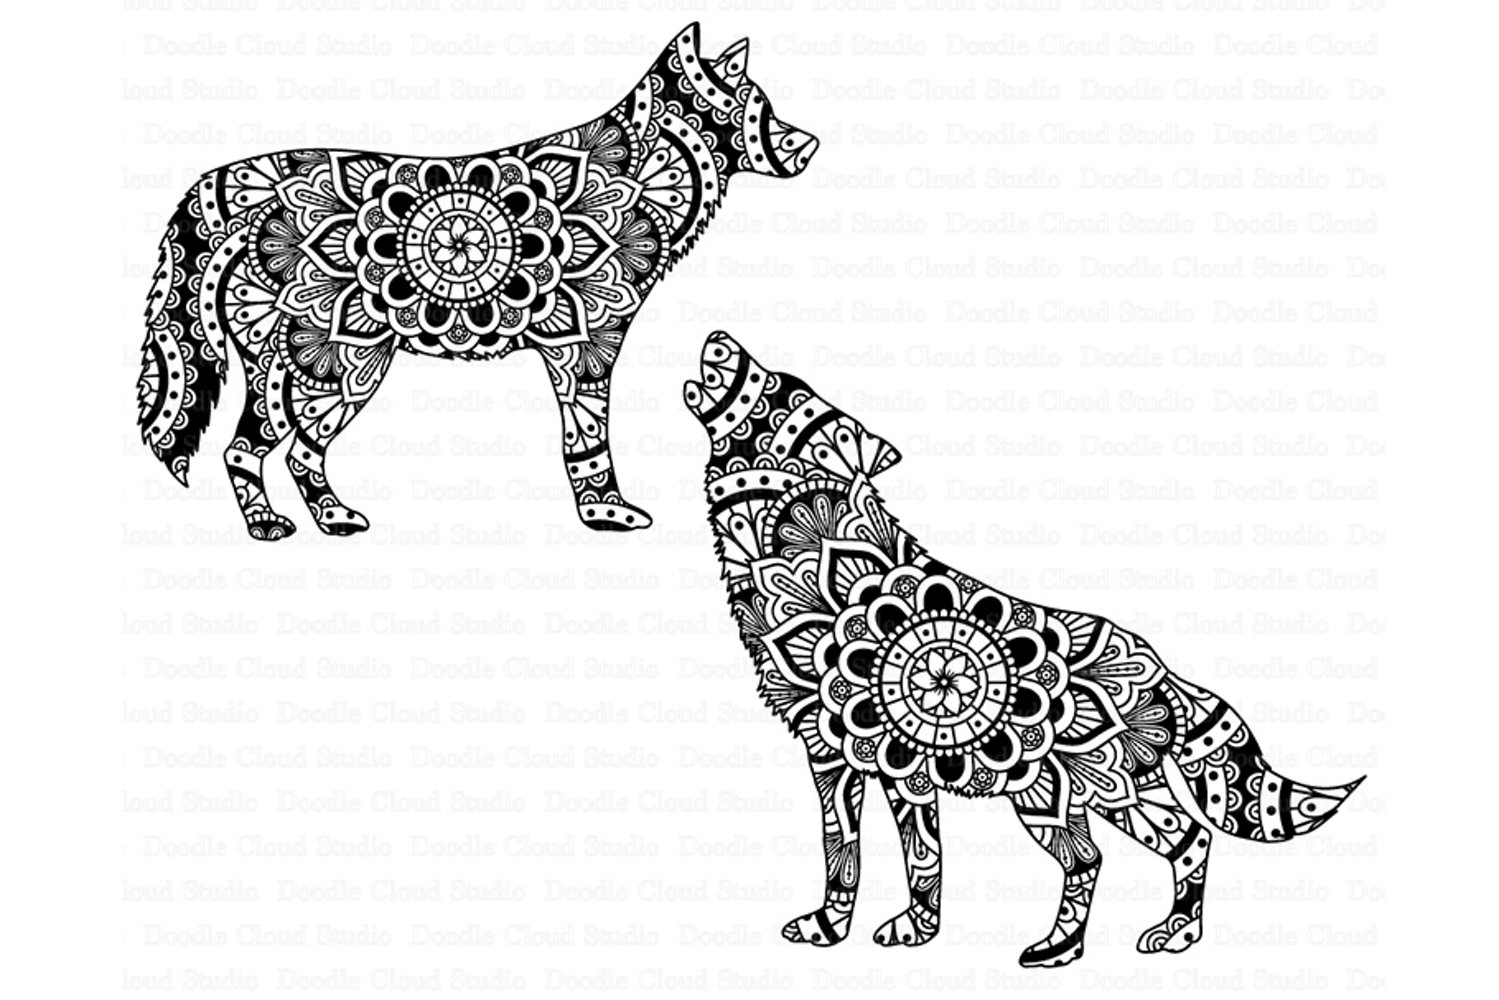 Wolf and a dog with a floral pattern on it.